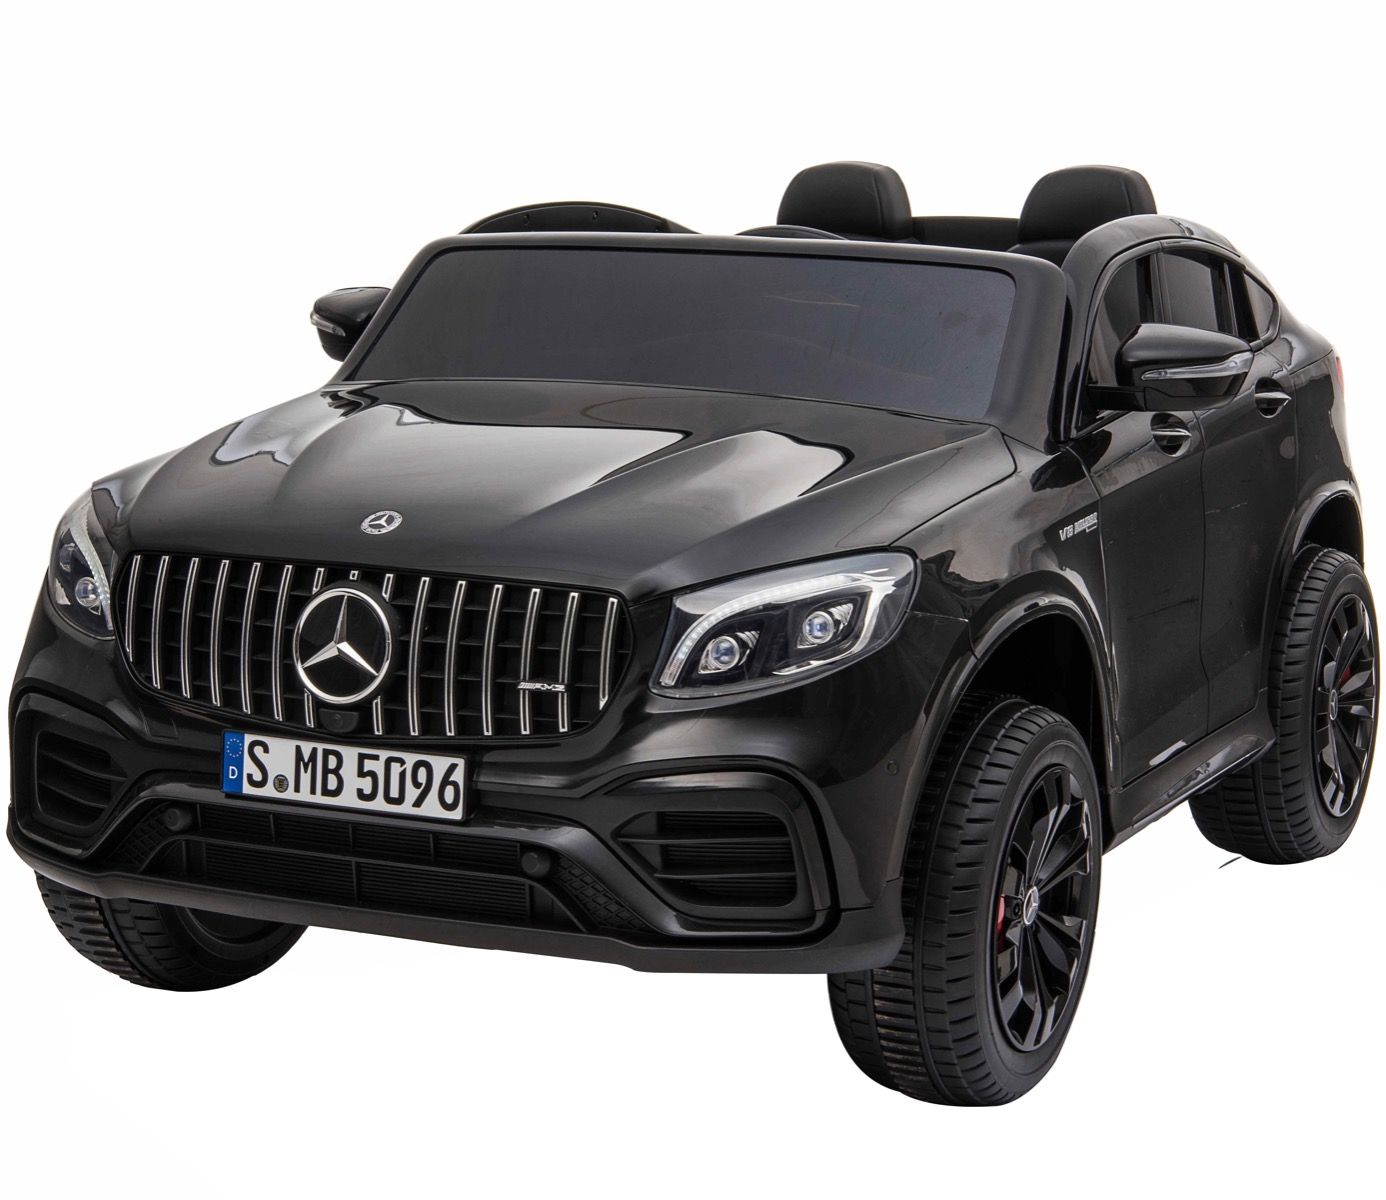 Black Mercedes AMG GLC63 S Coupe 2 Seater Electric Ride On Toy Car for Kids on White Background